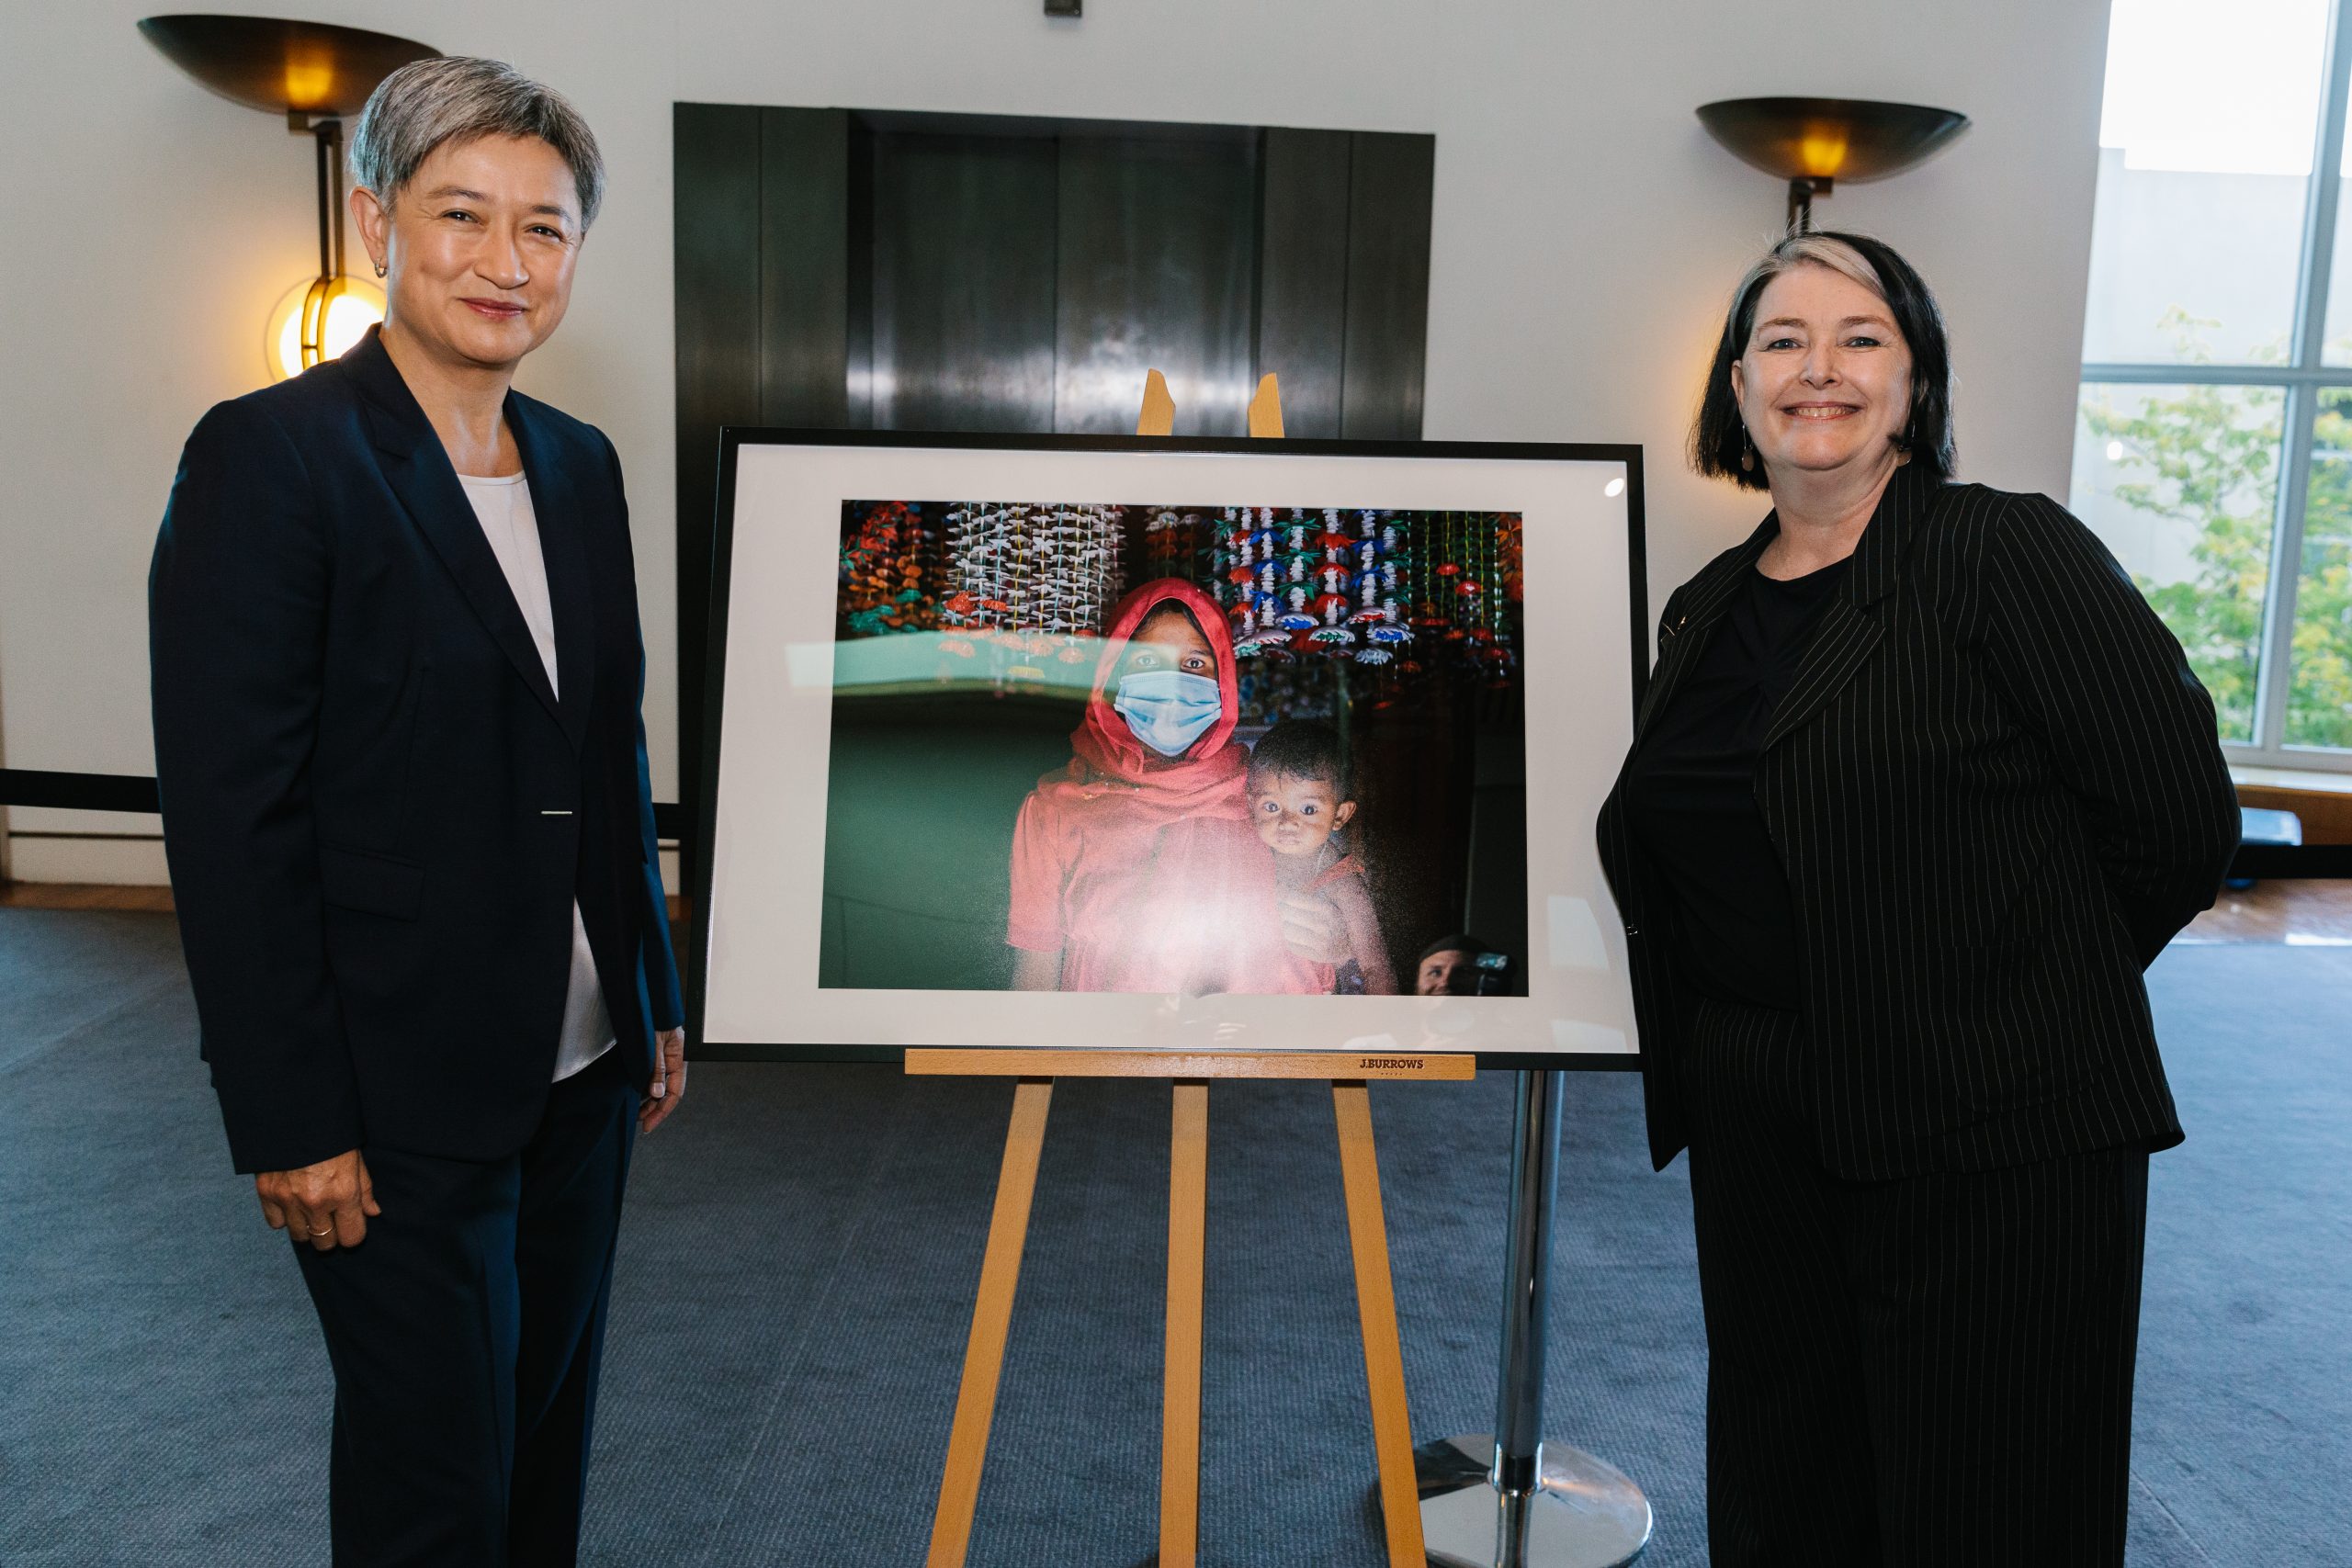 Foreign Minister Penny Wong stands with Lyn Morgain, ACFID Board Member and Chief Executive at Oxfam Australia at a Parliamentary event on COVID19 aid